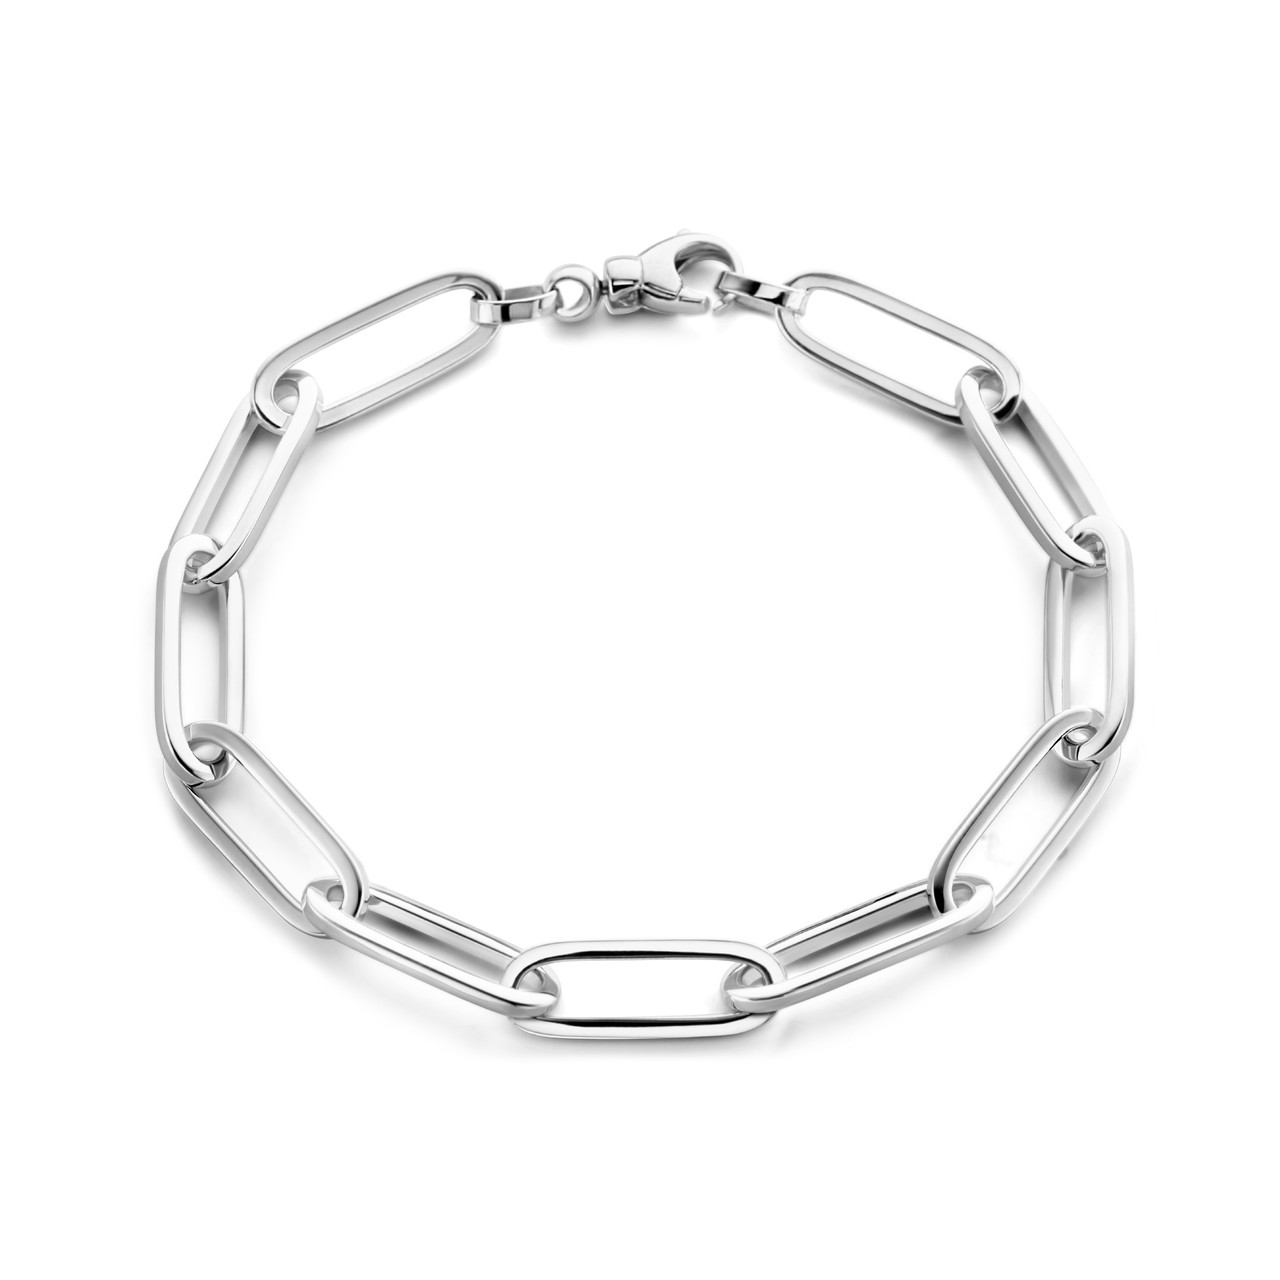 Parte Di - Sterling PDM32034 Me Silber 925 Armband